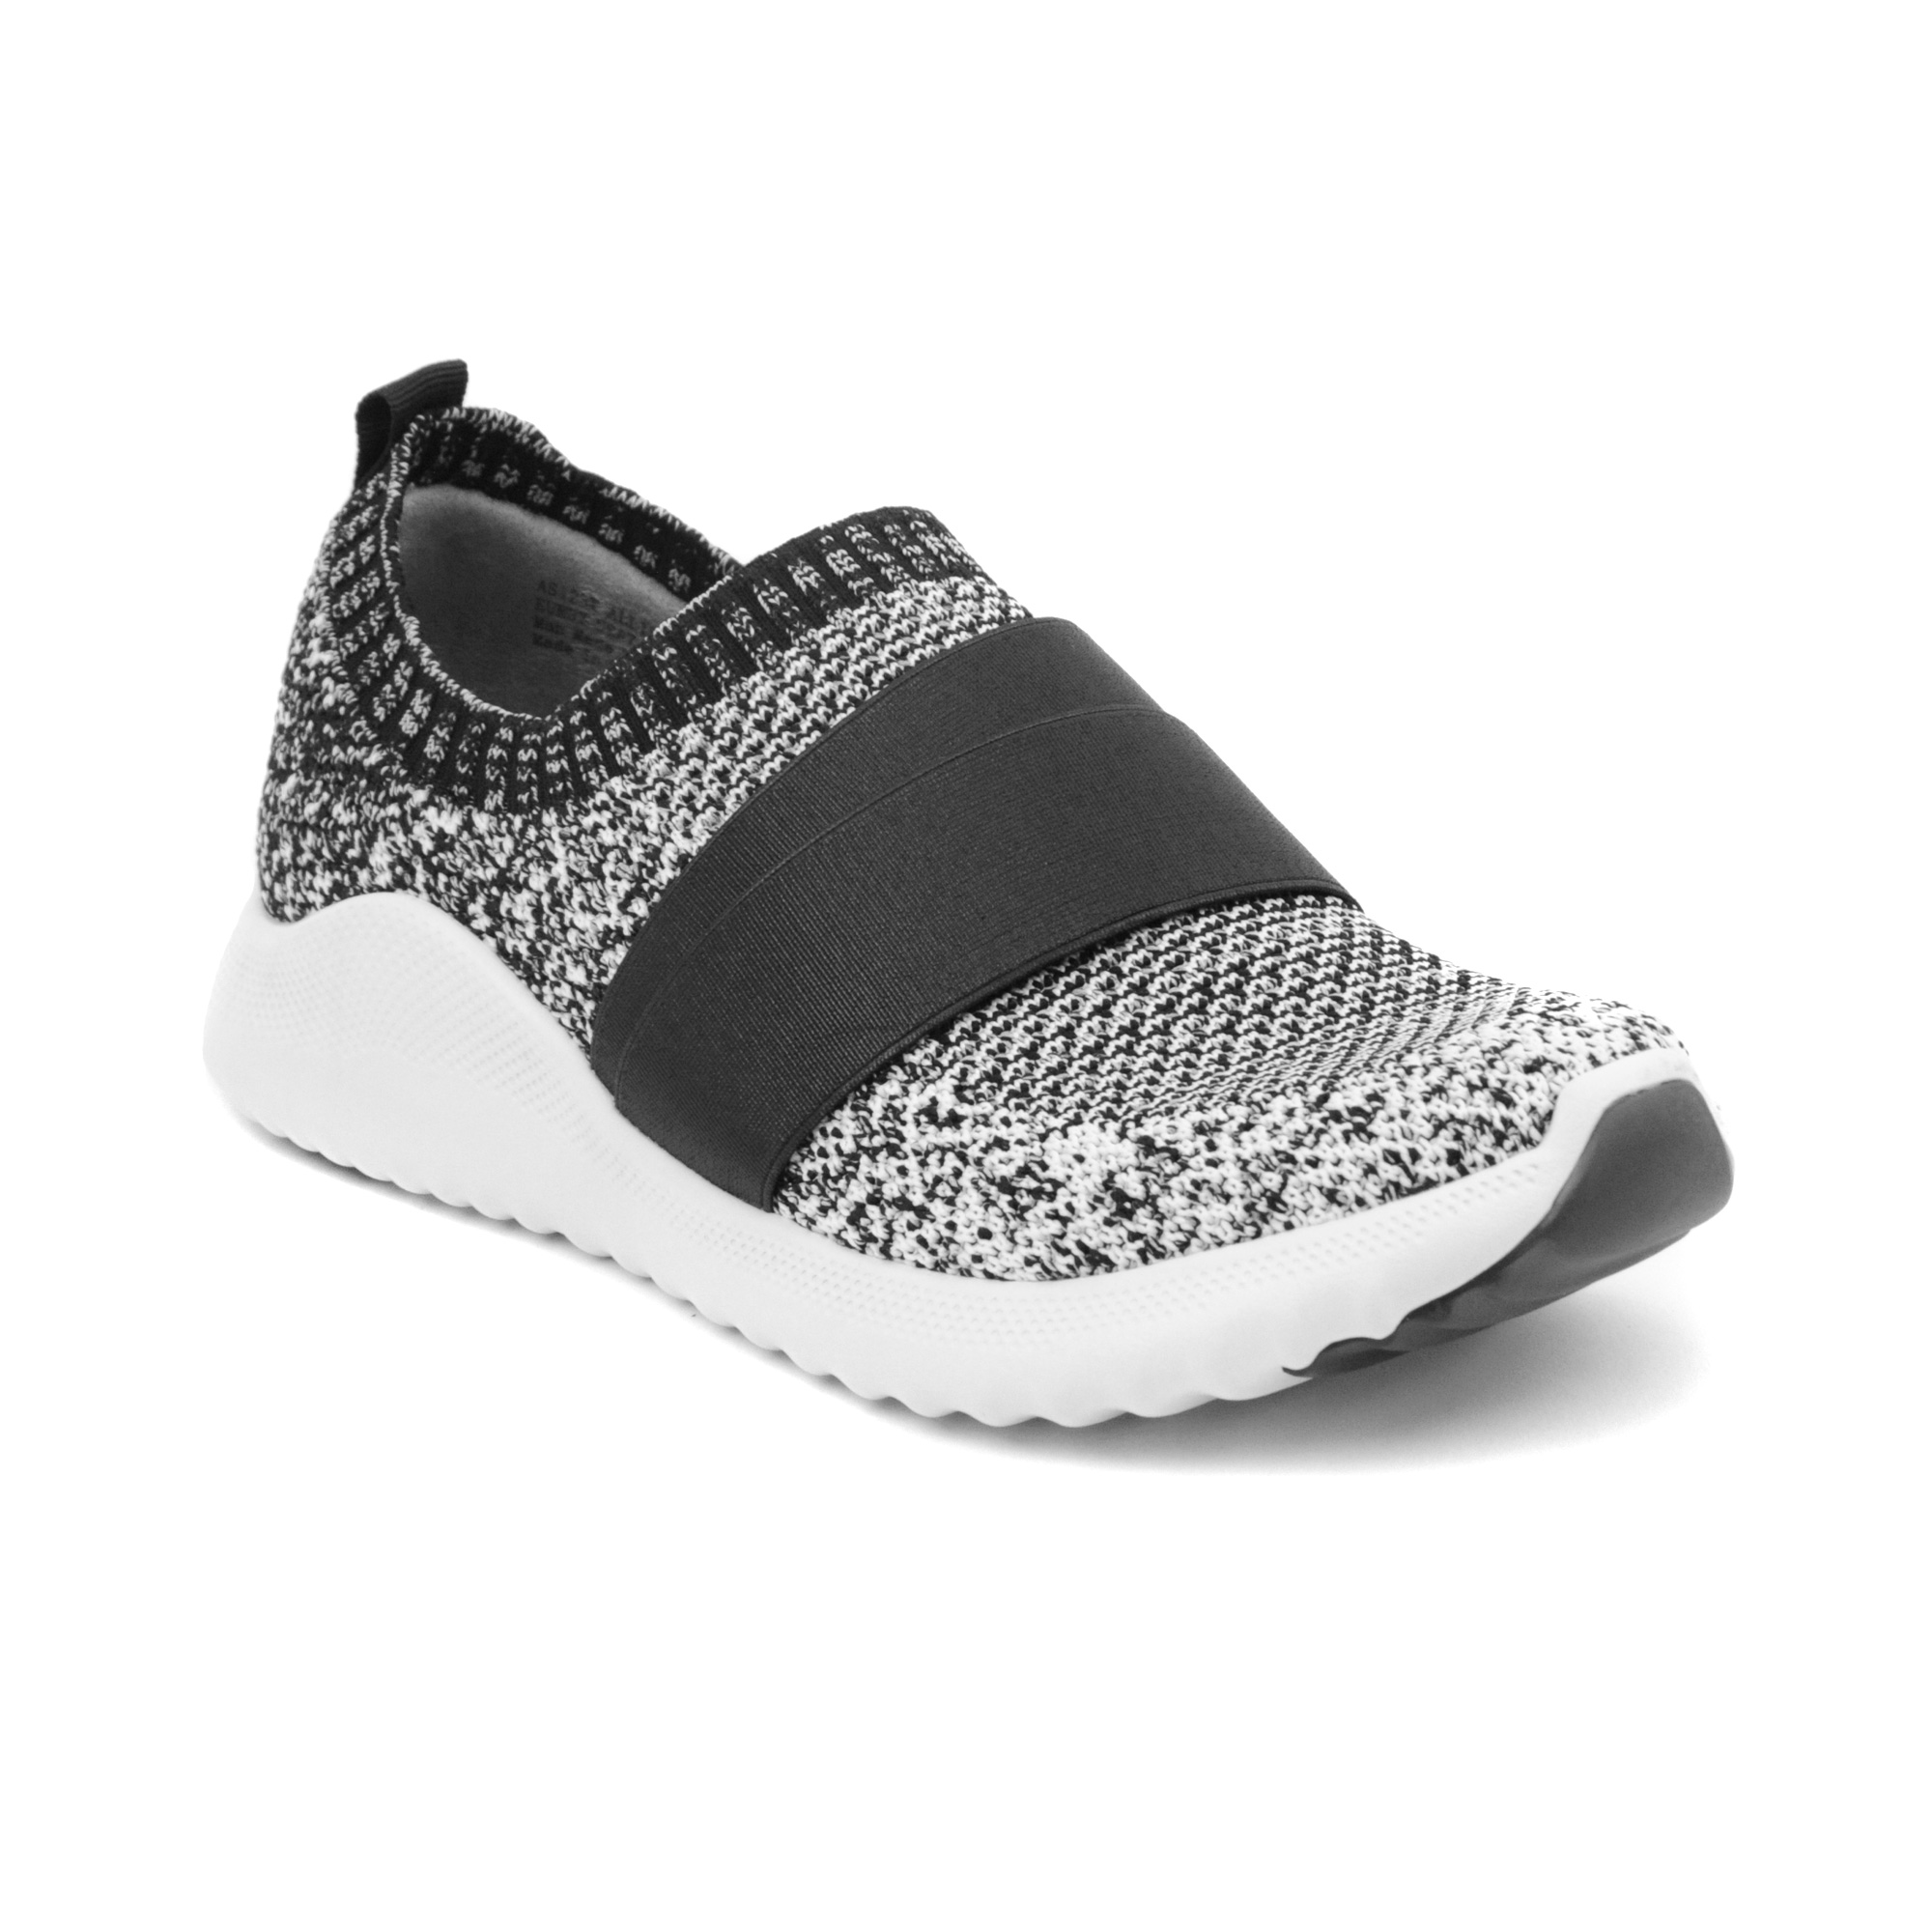 Herself To take care Bot Allie Arch Support Sneakers